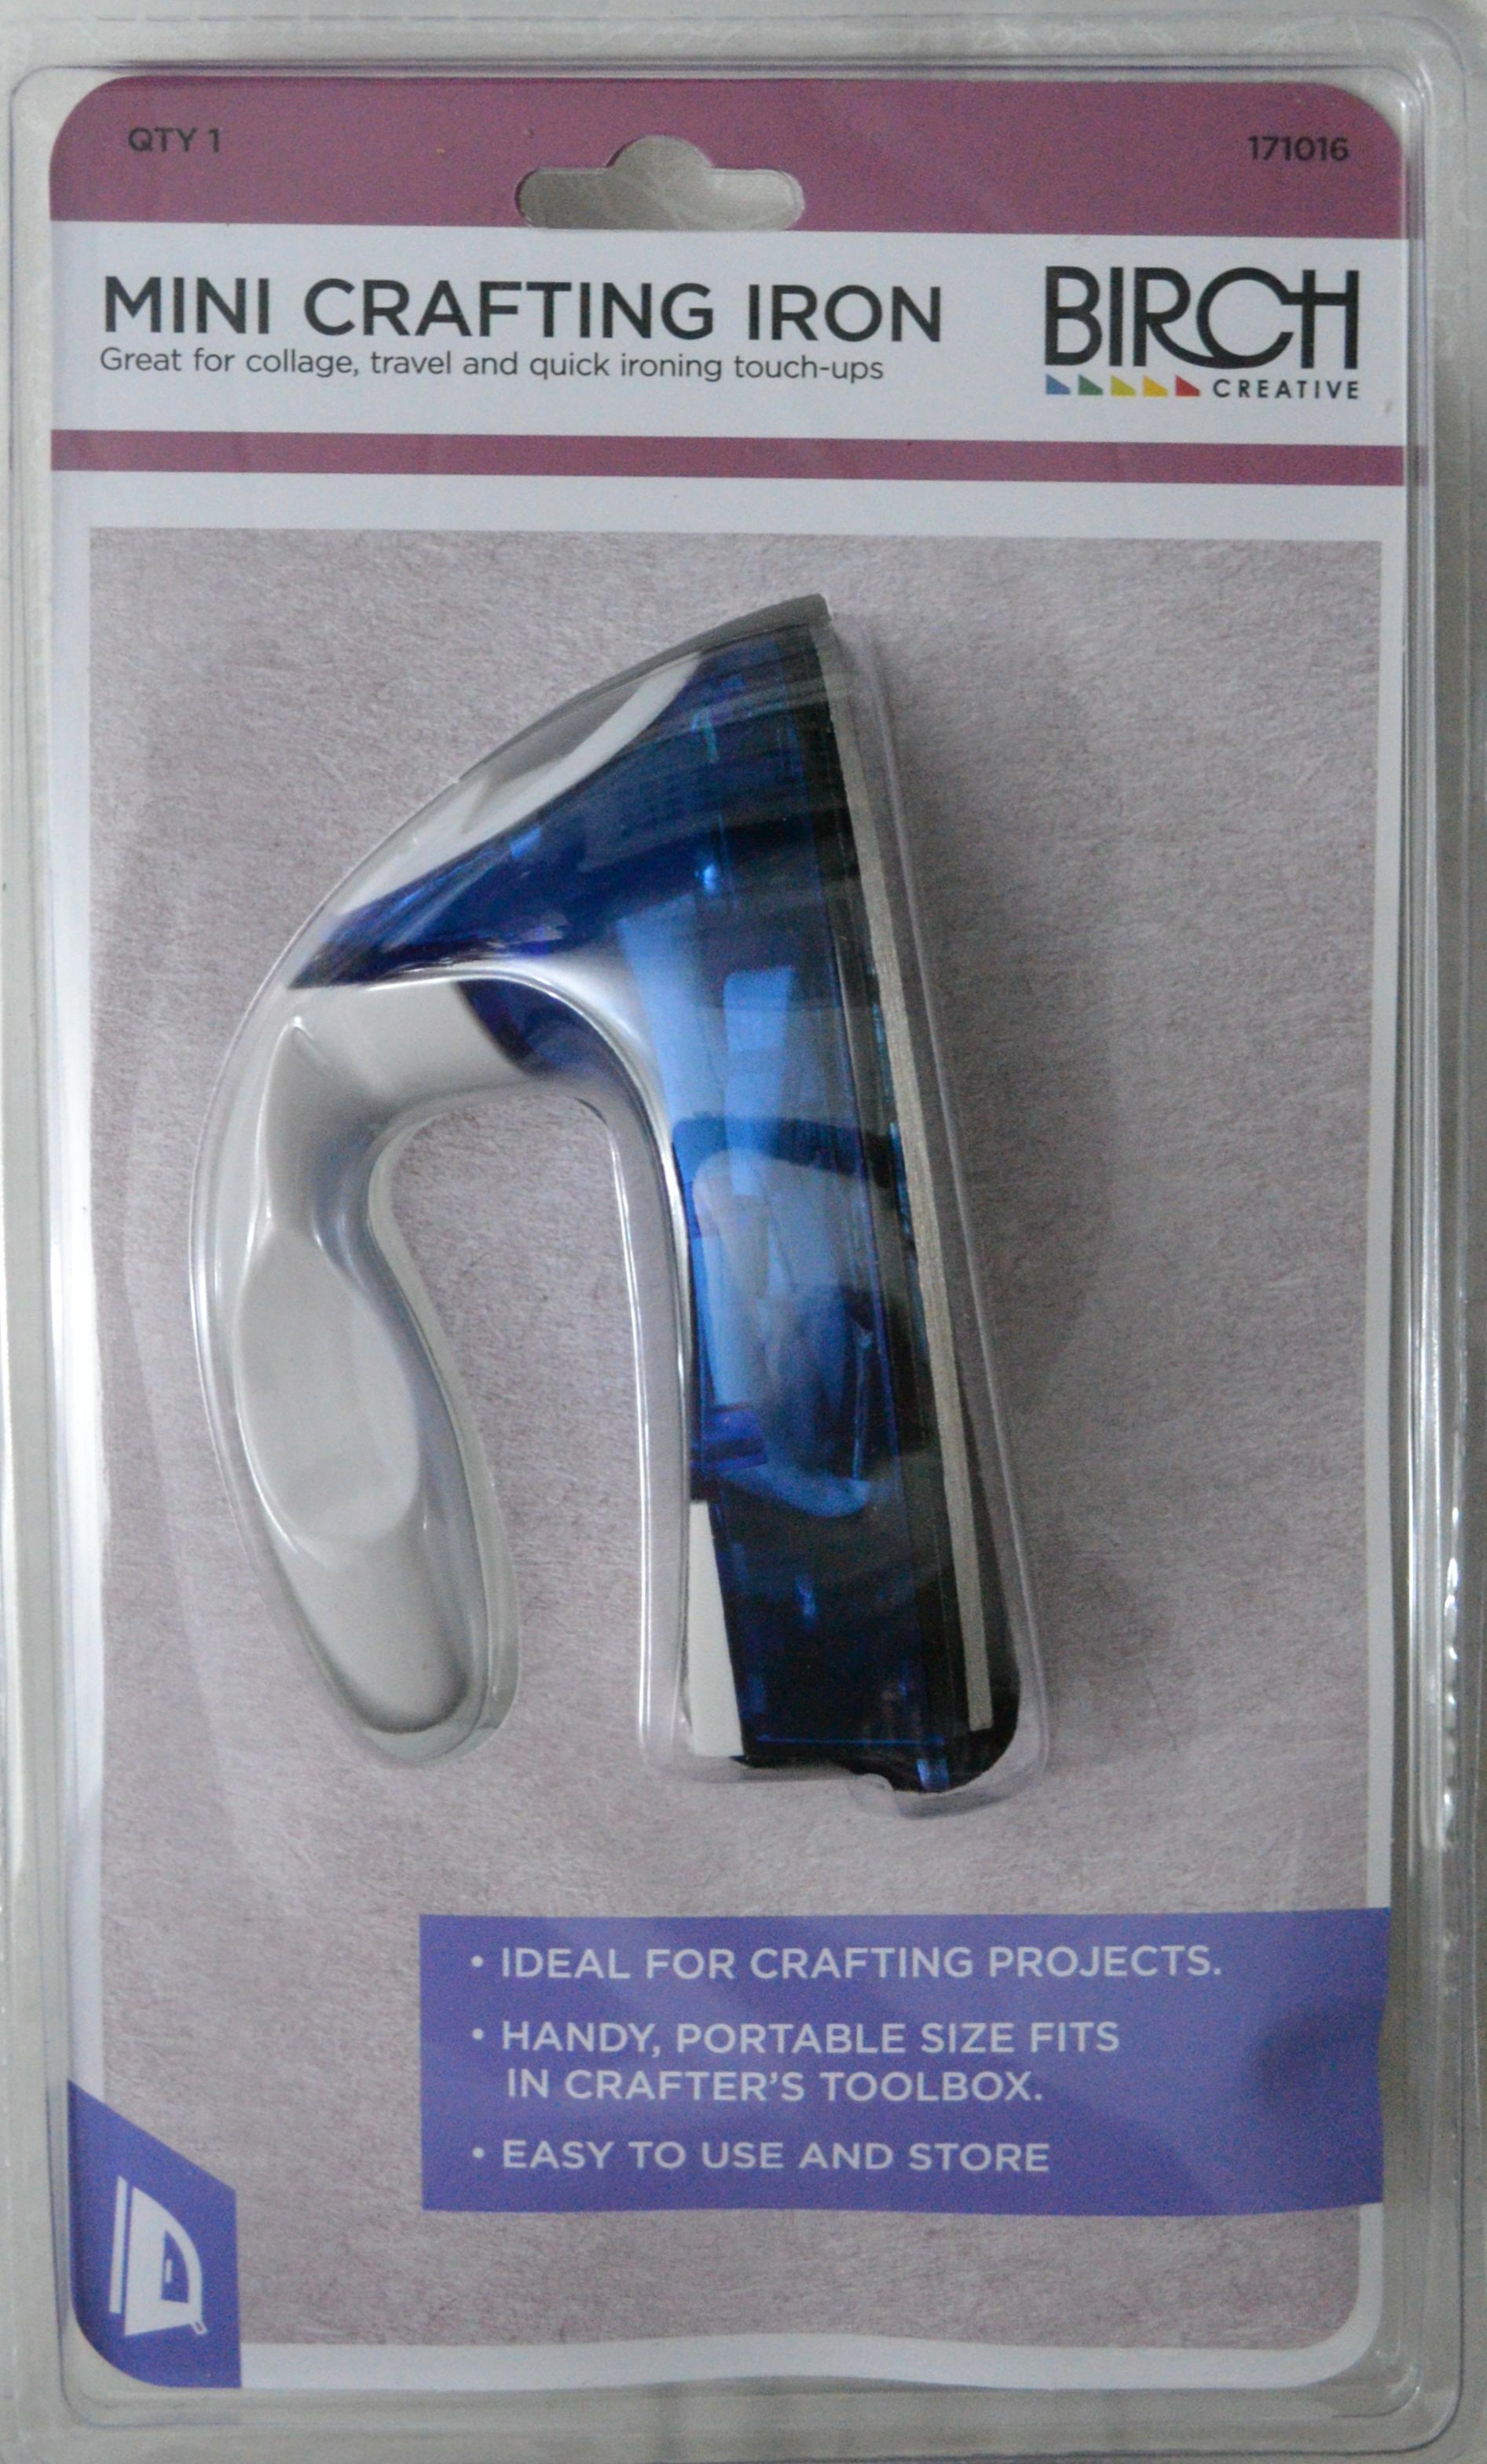 Mini Crafting Iron By Birch Creative, For Crafting, Travel etc.